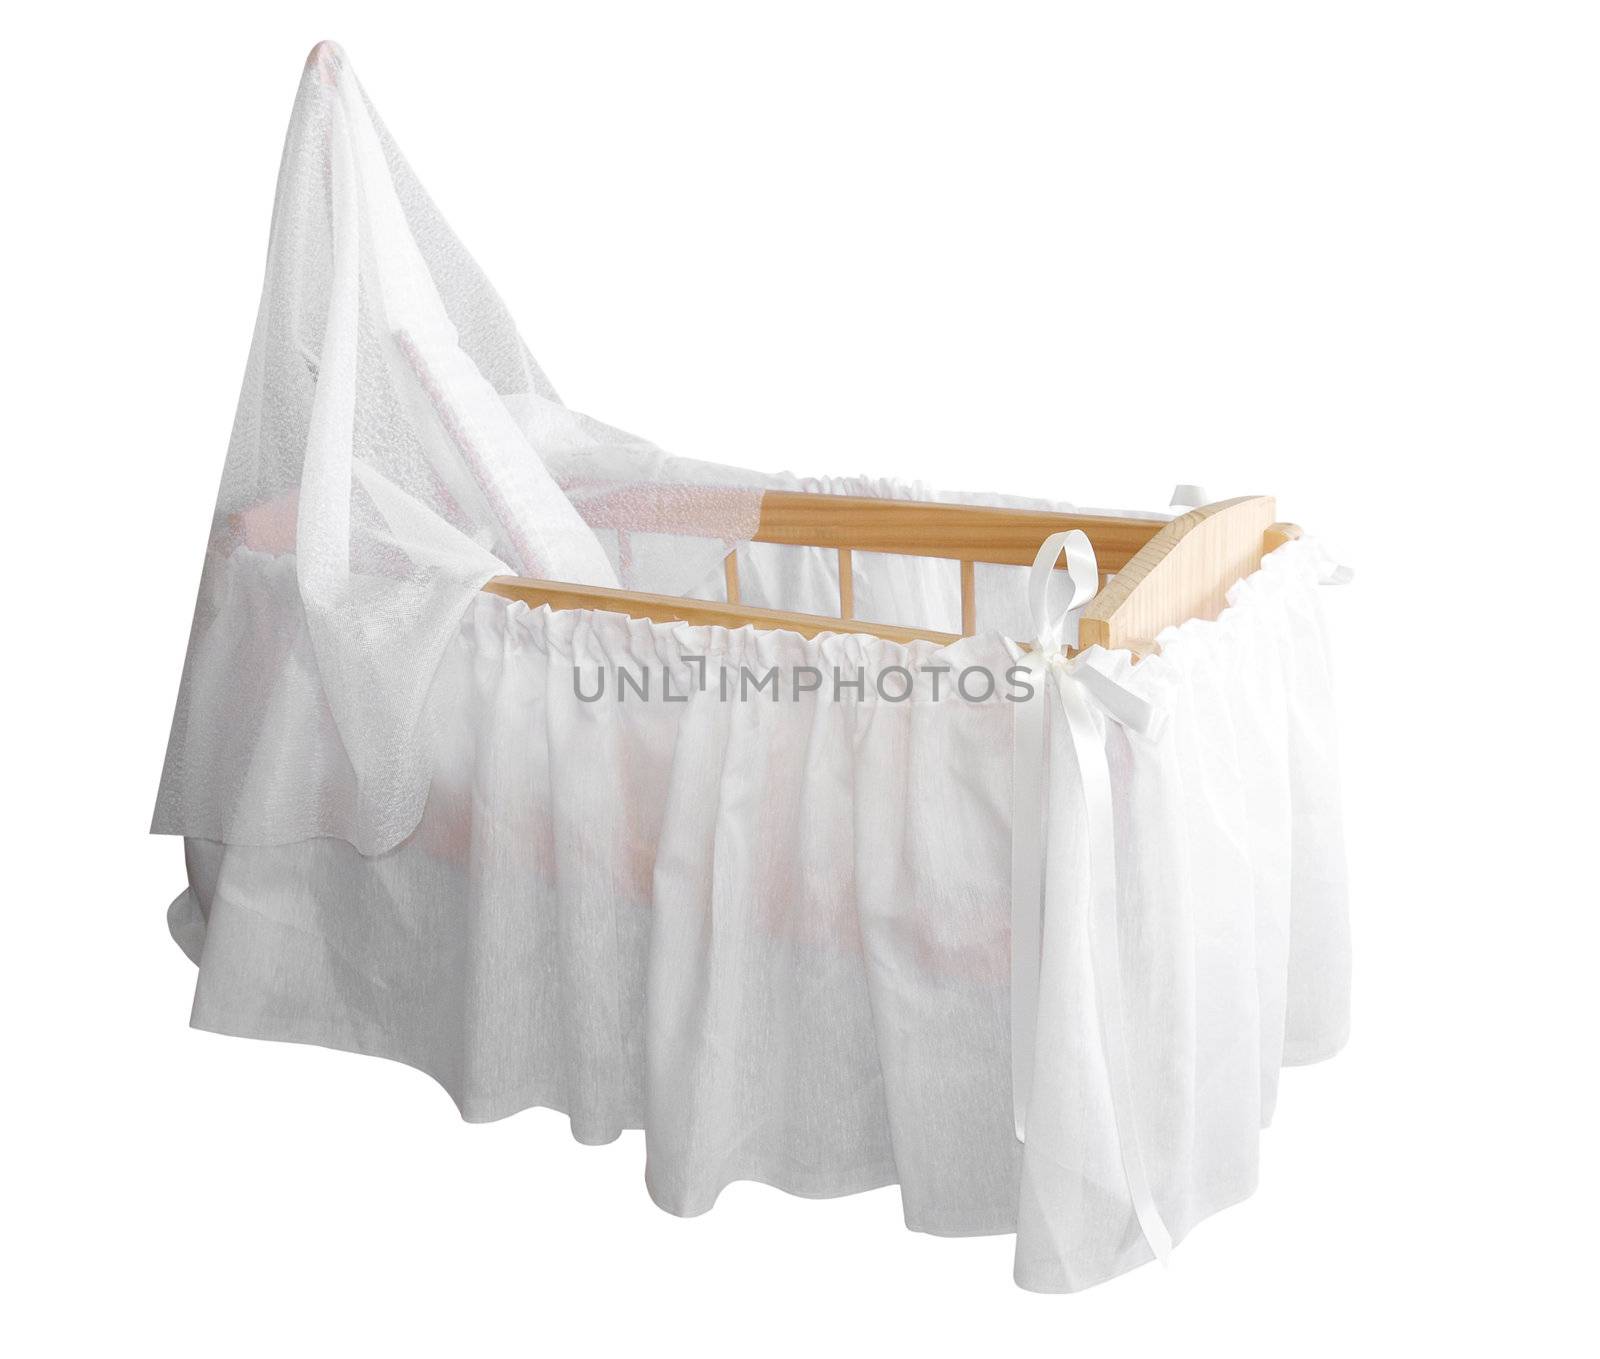 Wooden Bassinet with White Drapes isolated with clipping path      